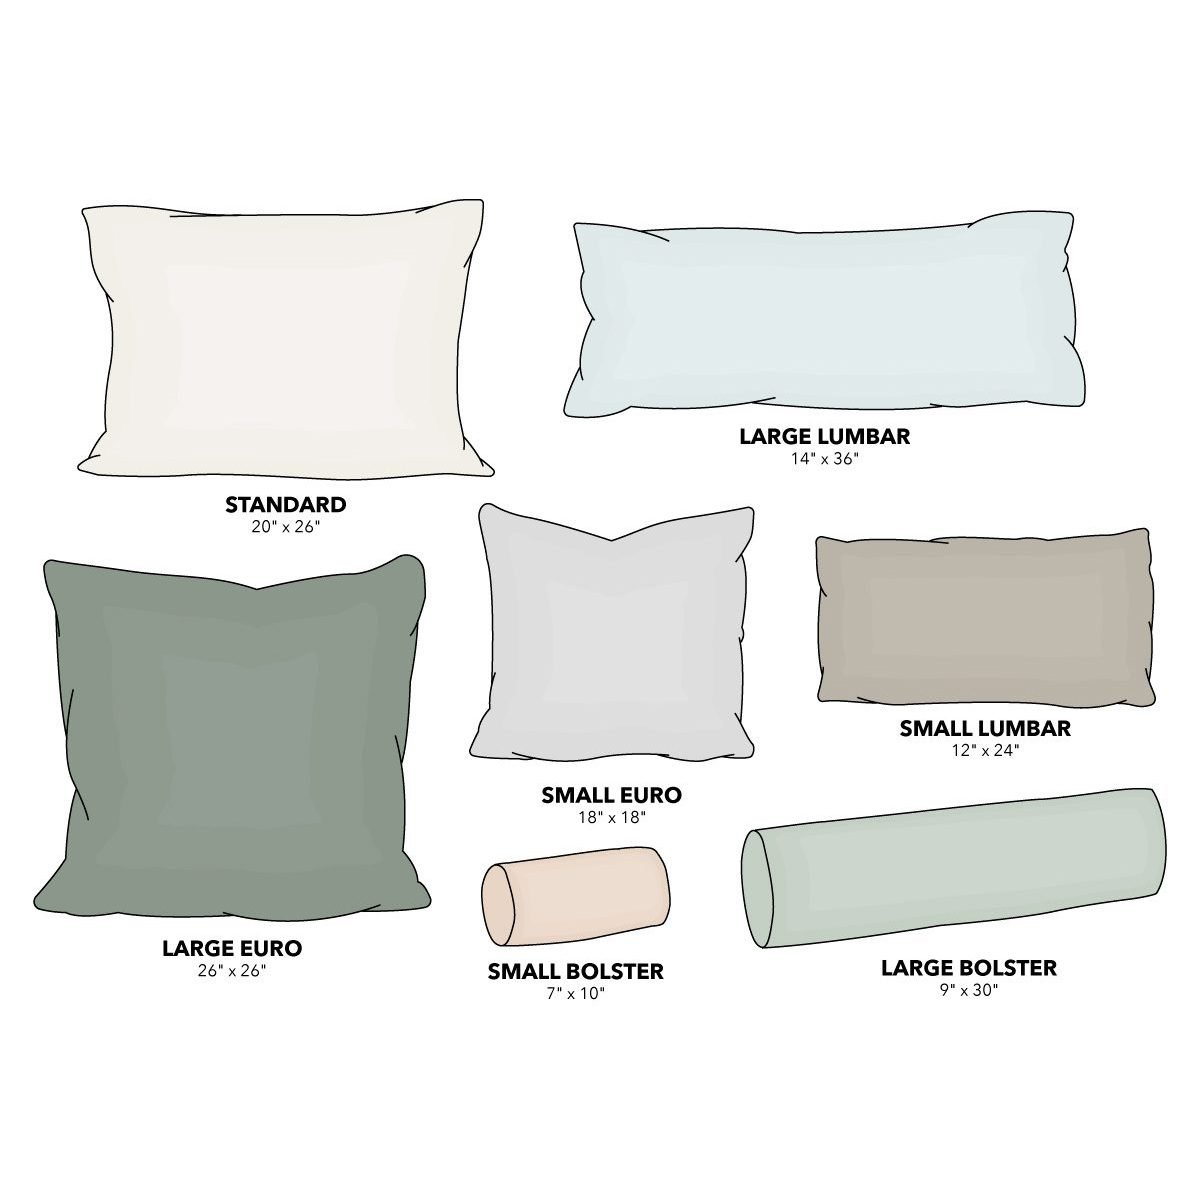 How to Arrange Pillows on a Bed, According to Pros